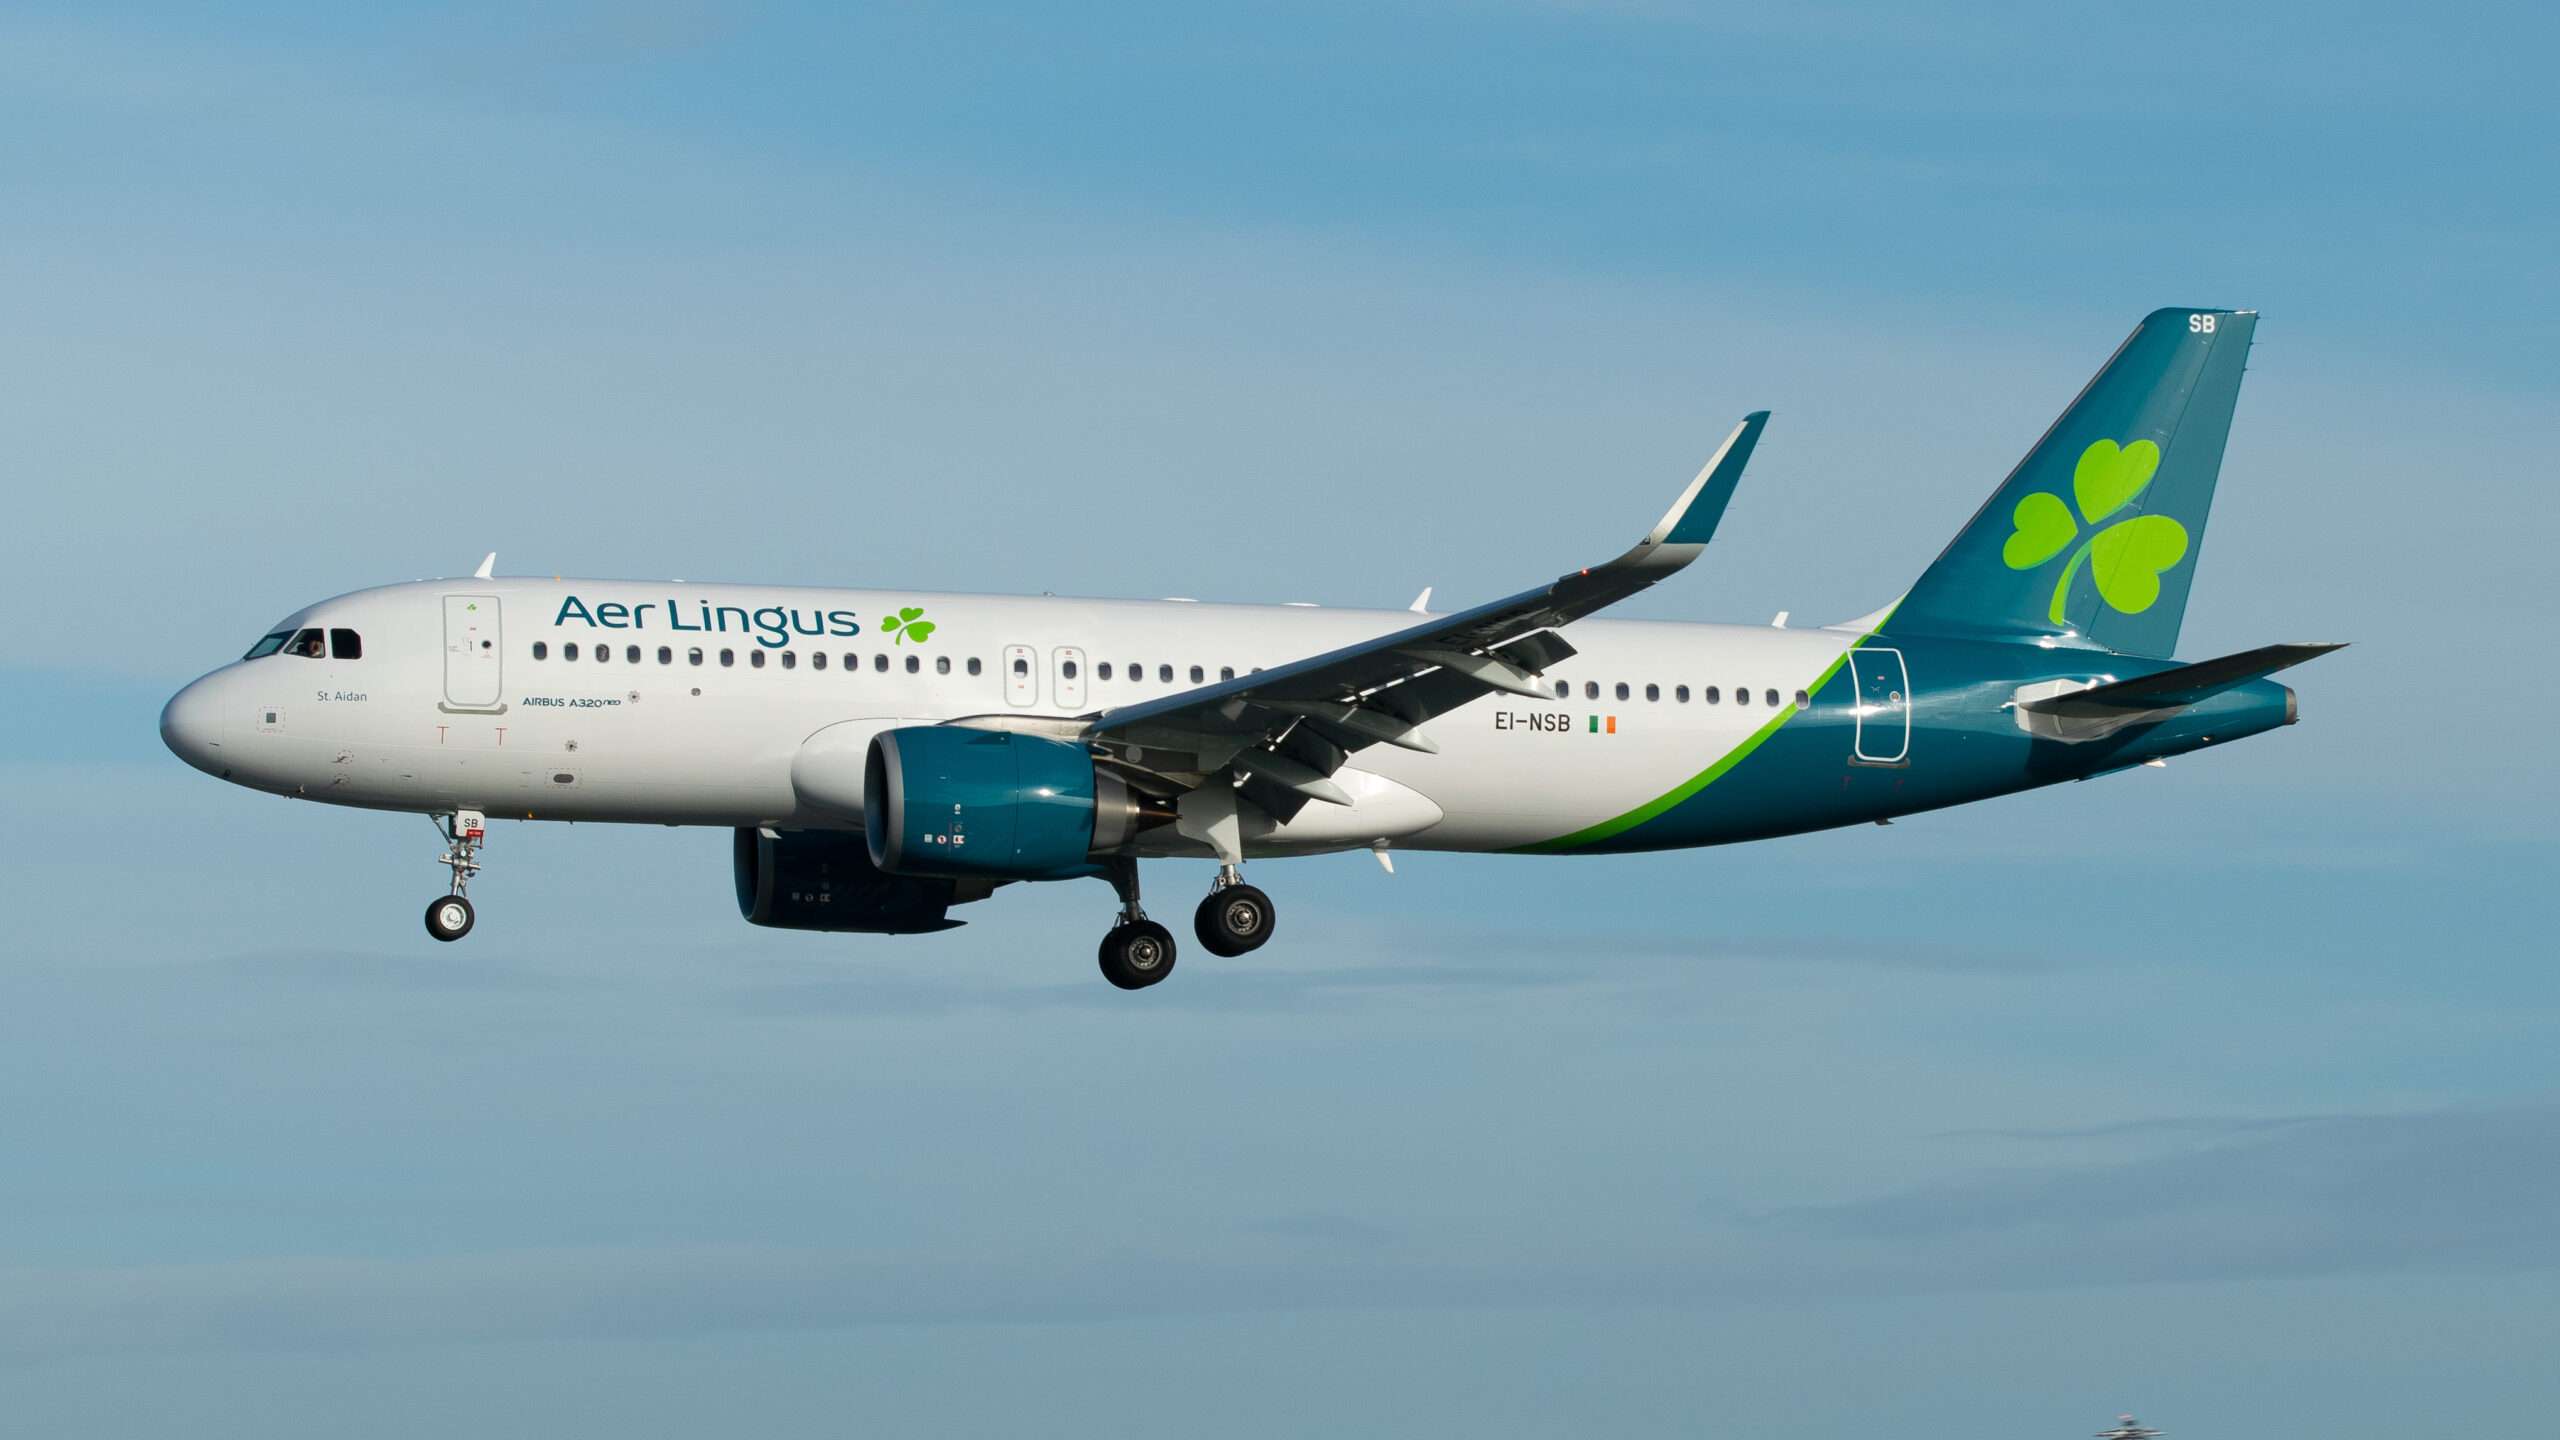 Dublin: Aer Lingus A320neo's Display at the Bray Air Show